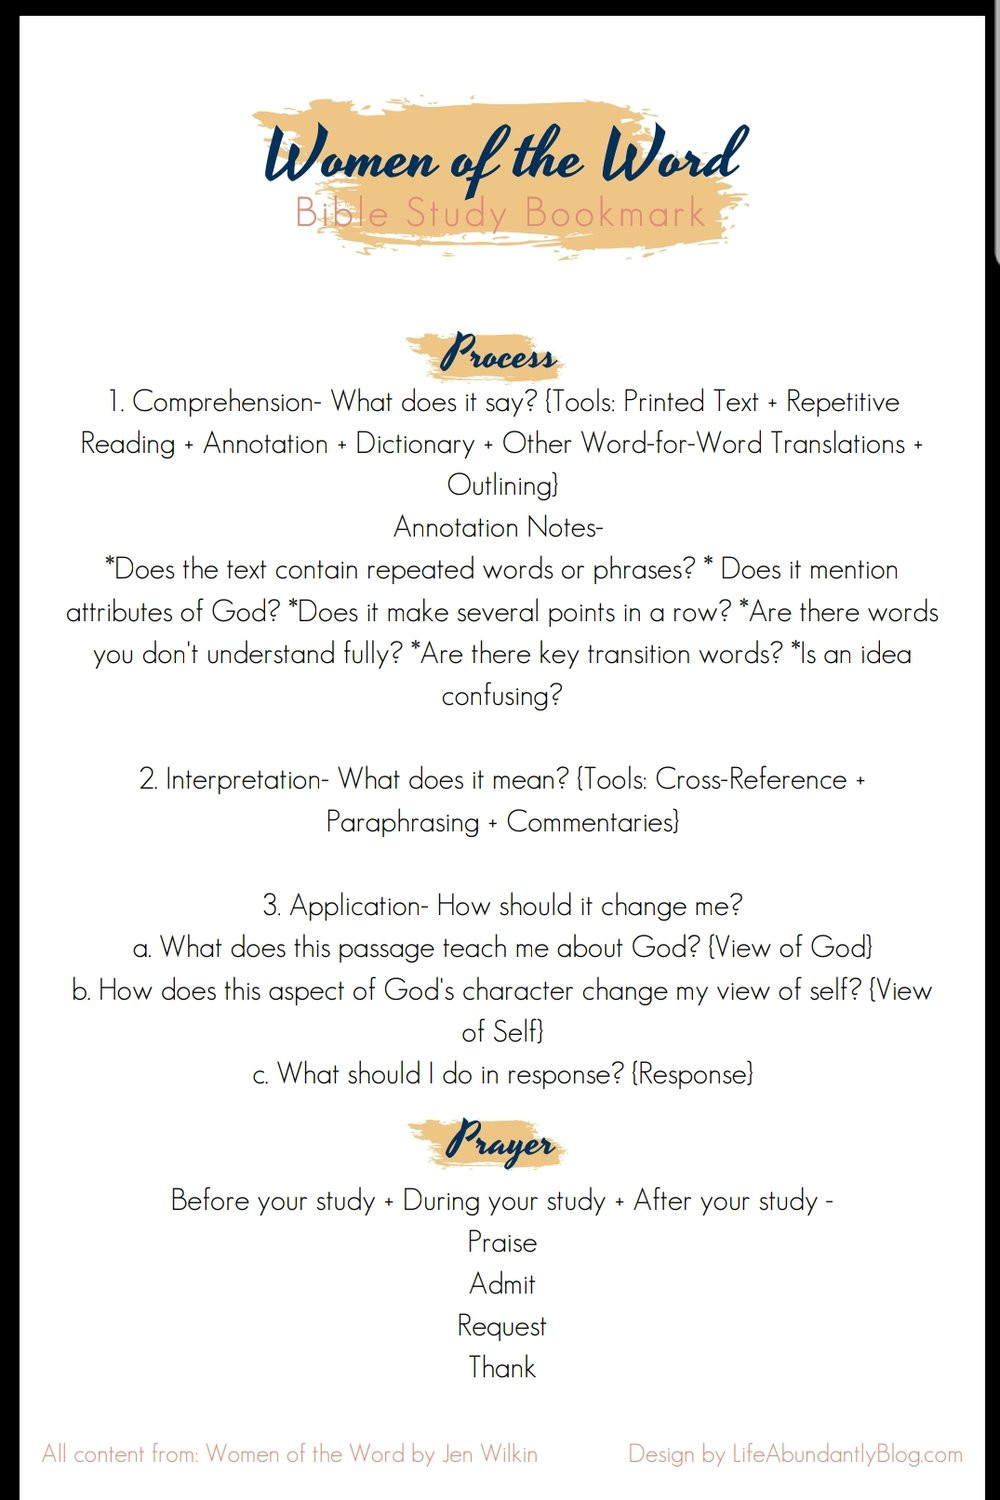 Womens Bible Study Leader Resume Samples Women Of the Word” Review   Cheat Sheet â Life, Abundantly